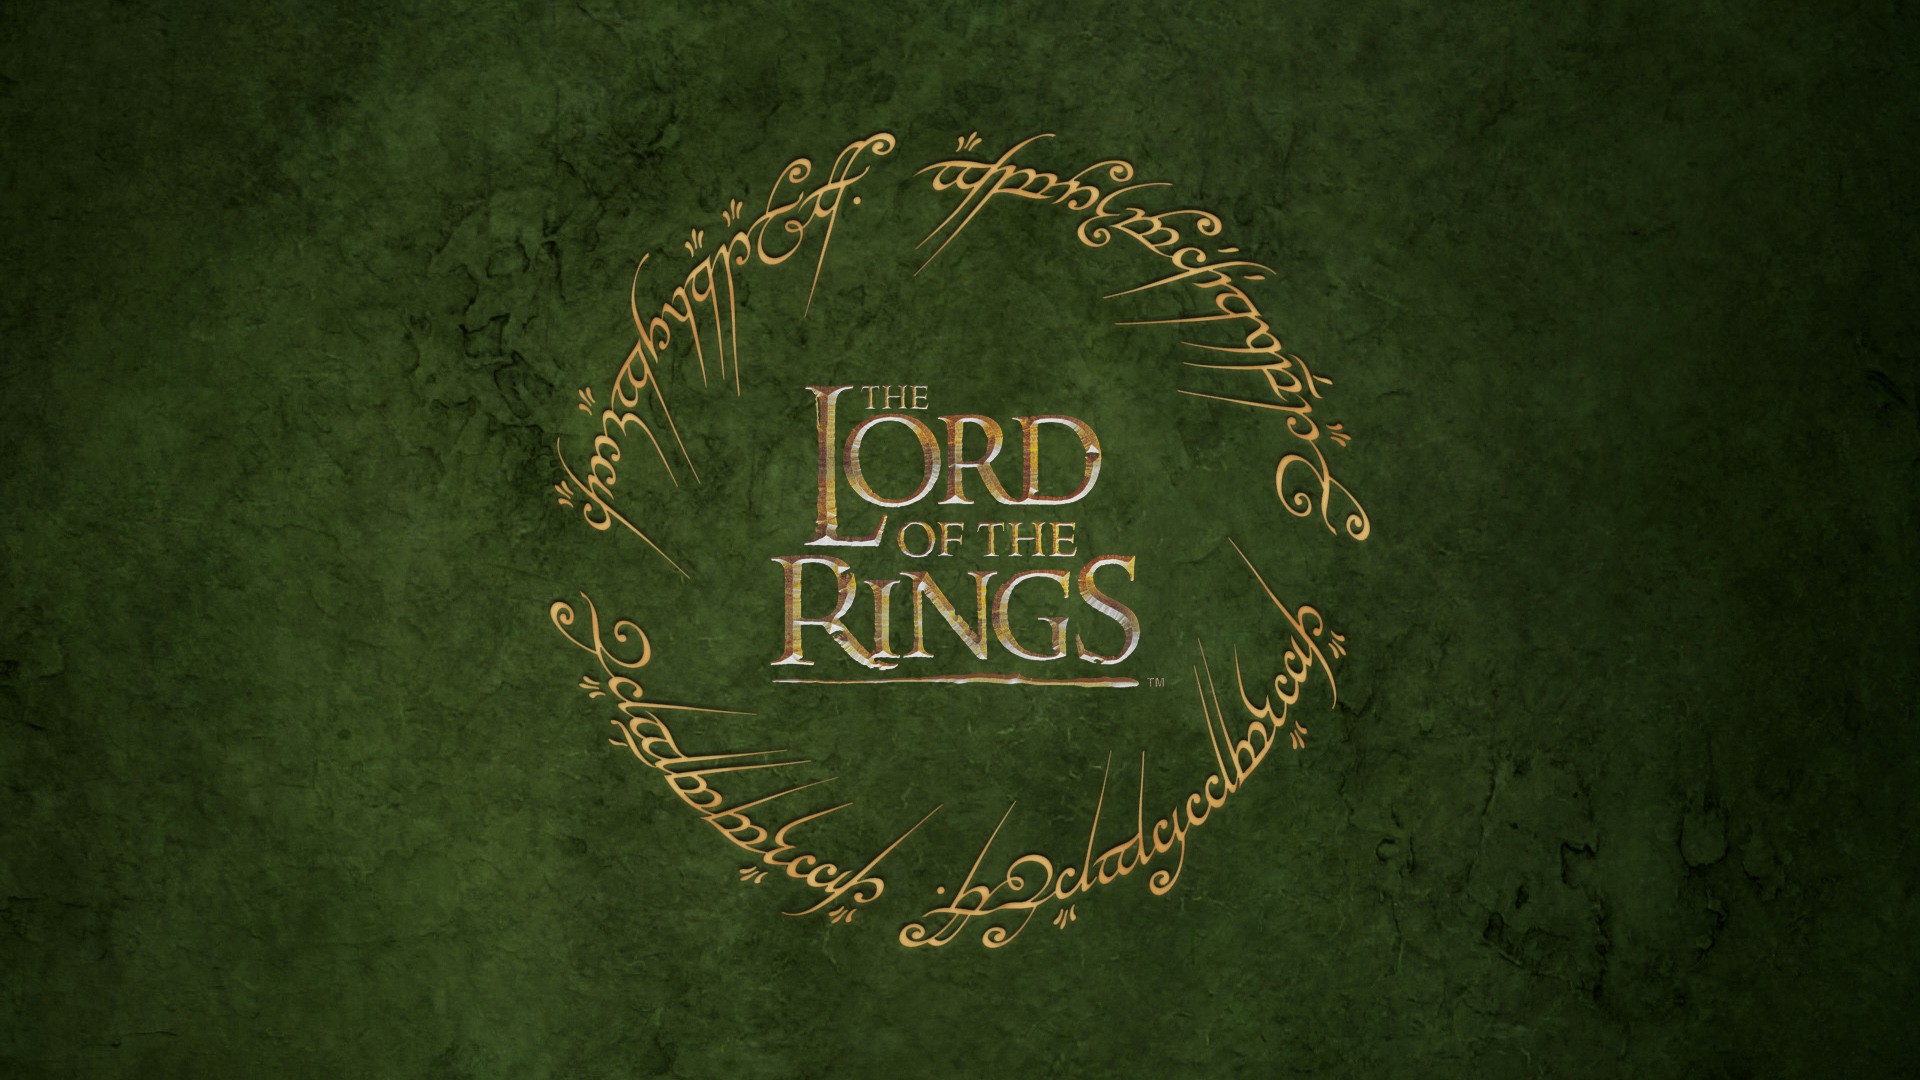 General 1920x1080 The Lord of the Rings movies 2001 AD J. R. R. Tolkien